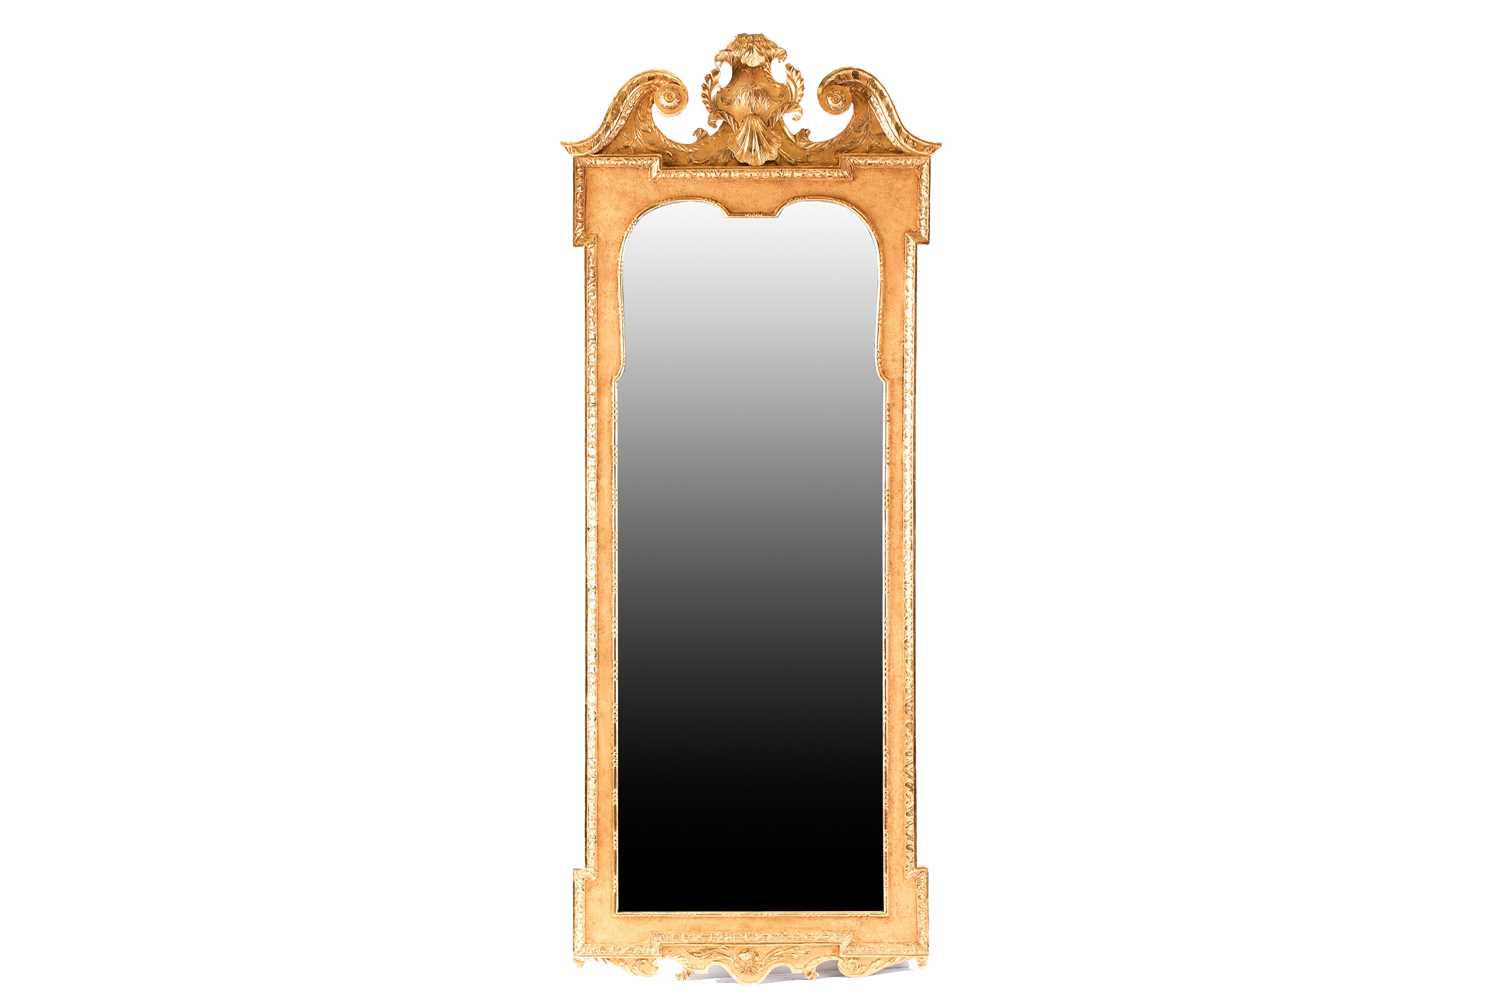 A Queen Anne carved wood and gilt gesso pier mirror with swan neck pediment and leafy mantle above a